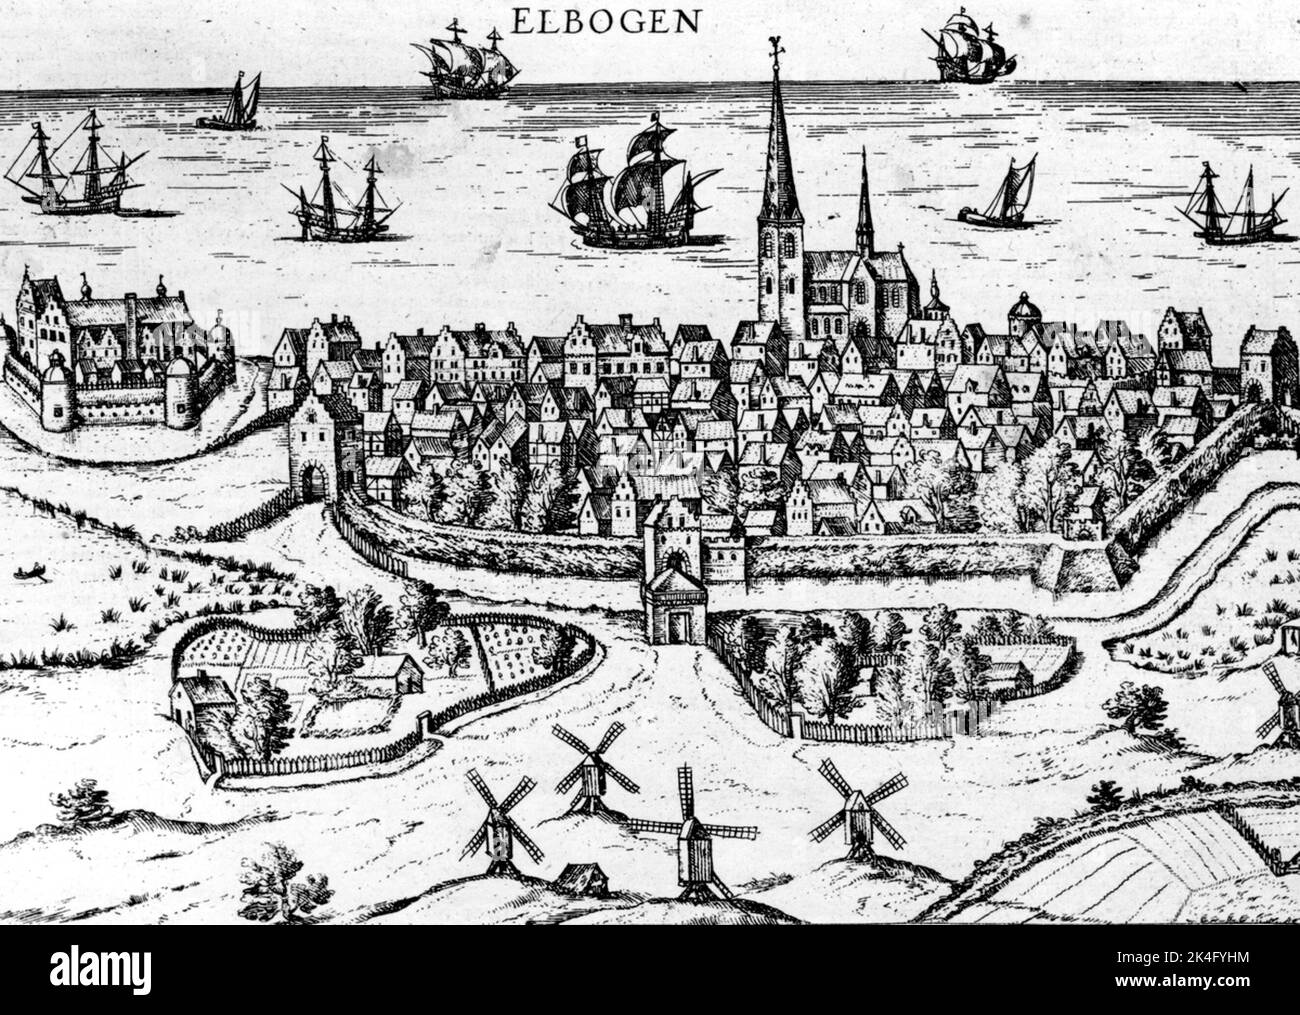 City view of Malmö from Samuel von Pufendorf's 'De Rebus a Carolo Gustavo Gestis', published in 1696. Nordic Stock Photo